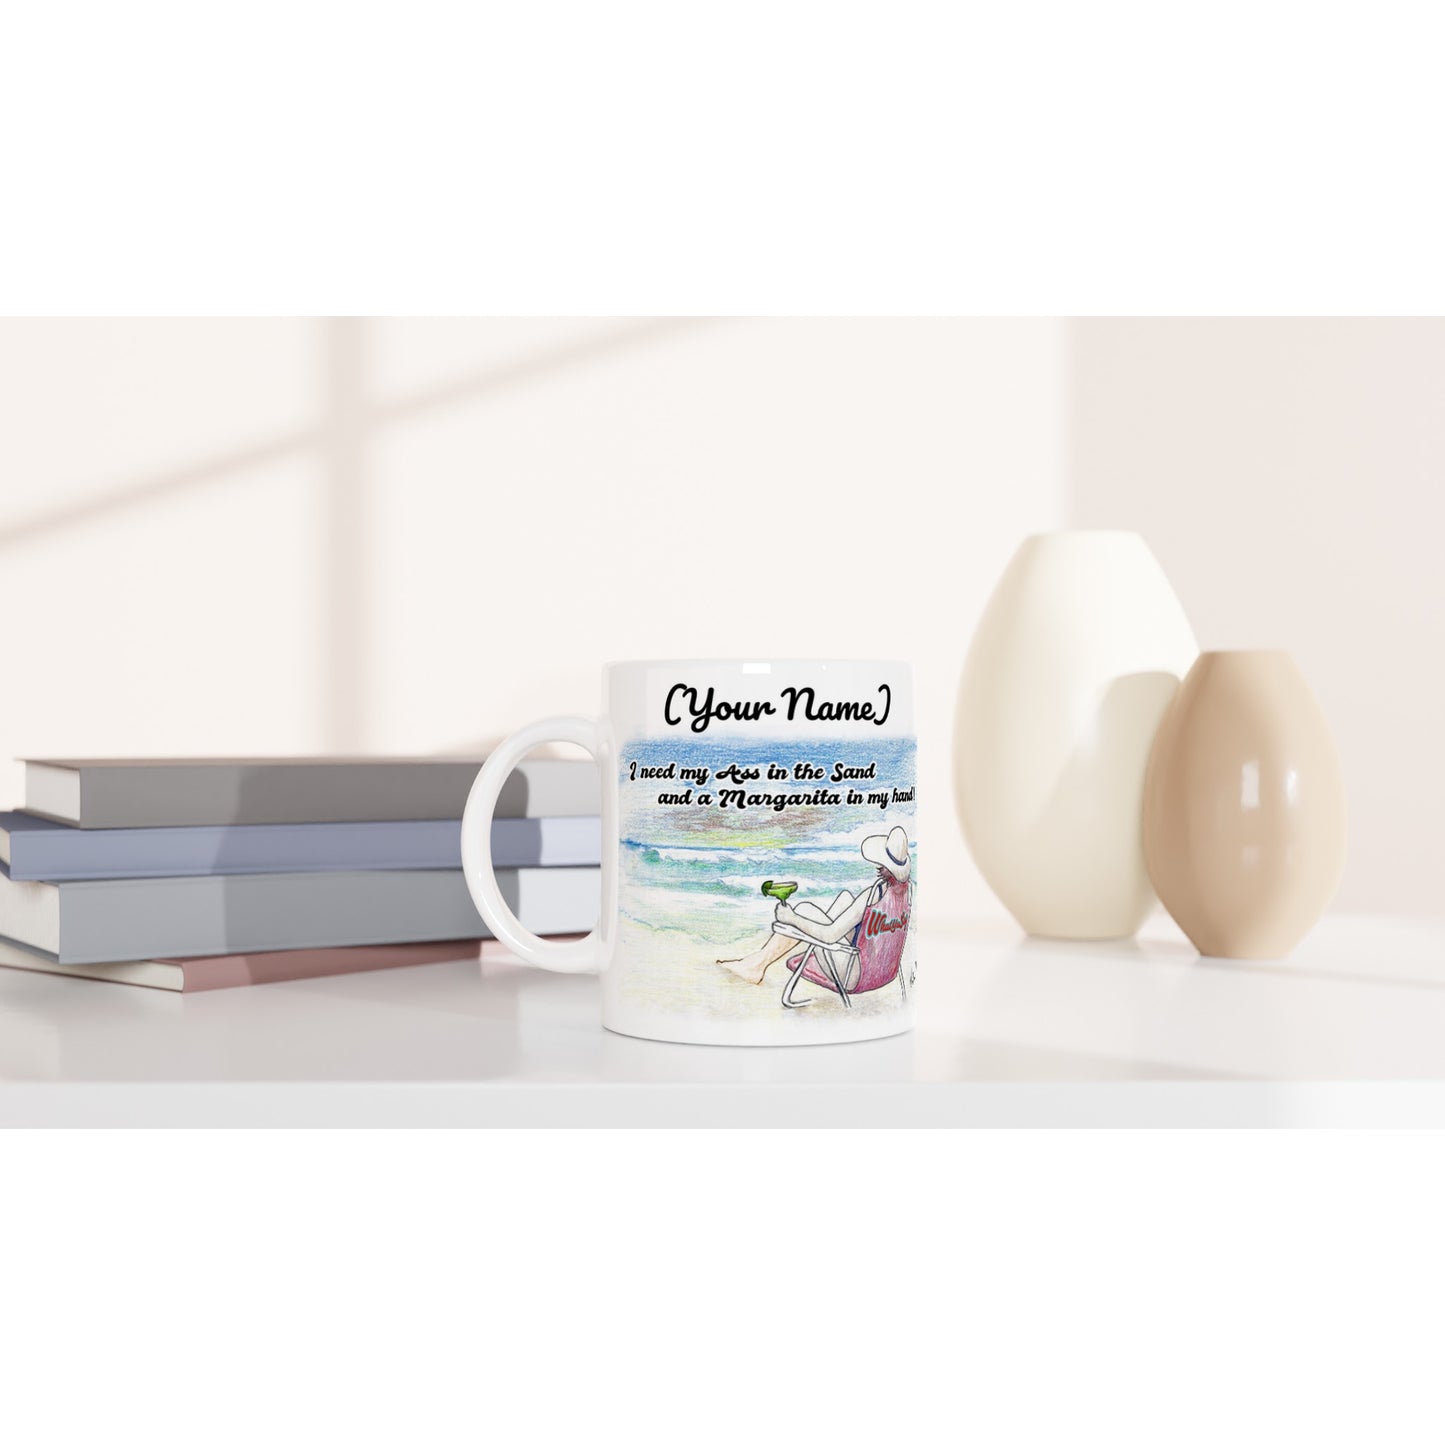 Personalized white ceramic 11oz mug with original personalized motto [Your Name] I need my Ass in the Sand and a Margarita in my hand on the front and WhatYa Say logo on the back dishwasher and microwave safe from WhatYa Say Apparel sitting on coffee table with books and two vases.